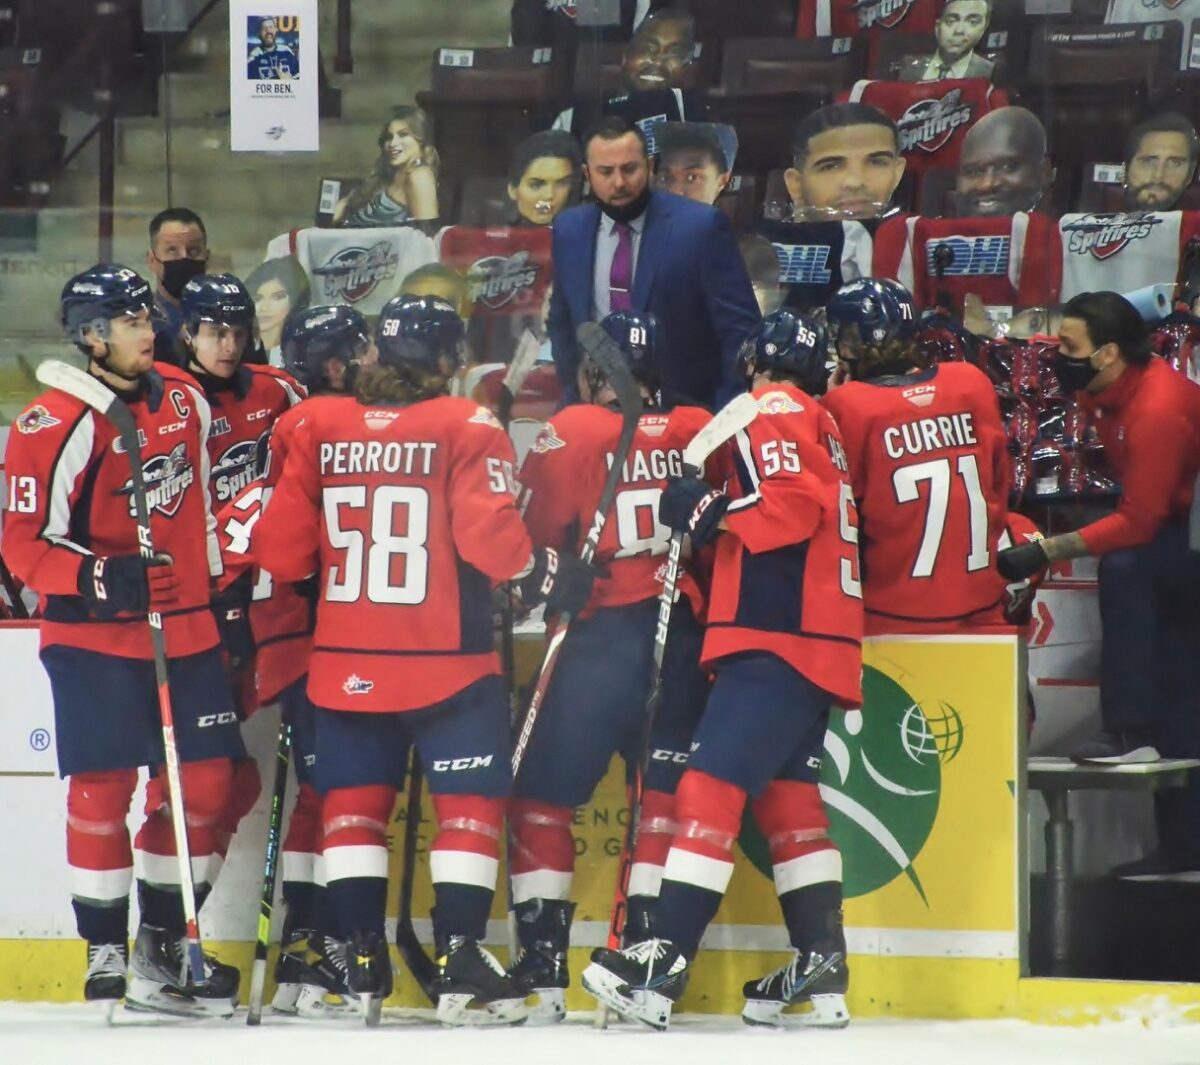 Marc Savard Windsor Spitfires-Stars Top Candidates for Their Next Head Coach